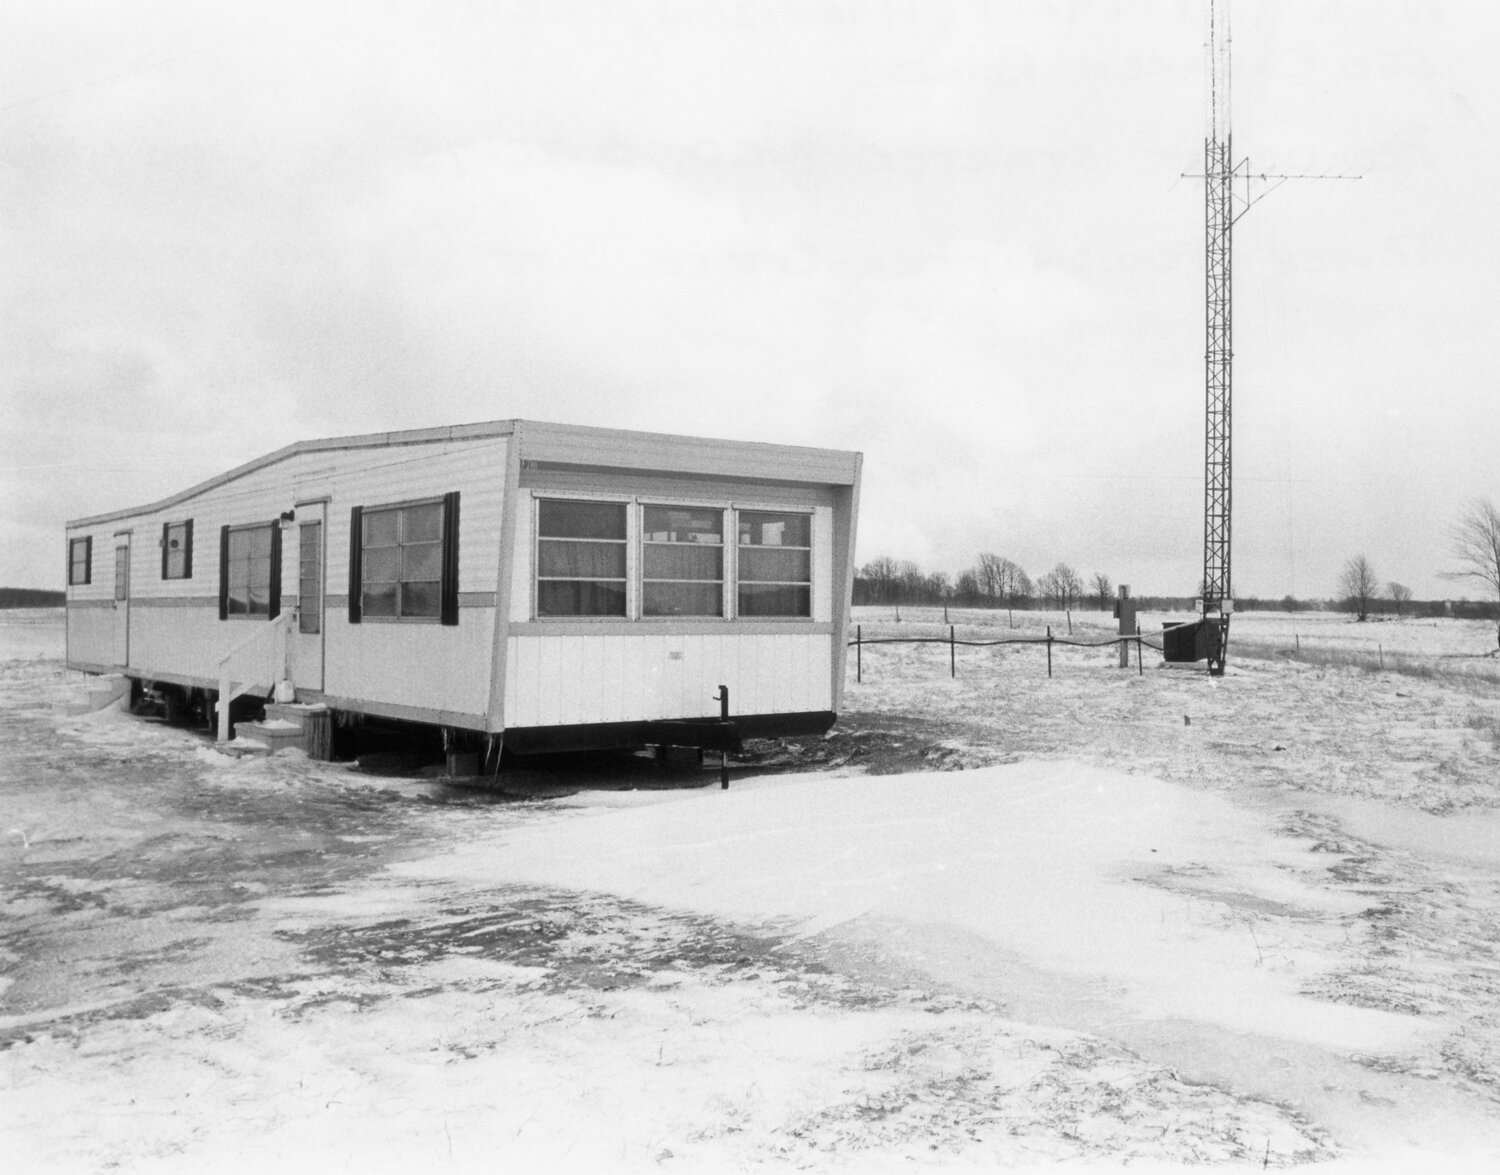 This mobile home and transmitter was the first location of Dave Carmine’s radio station, WKKM in the mid-1970s on Larch Road west of Harrison.